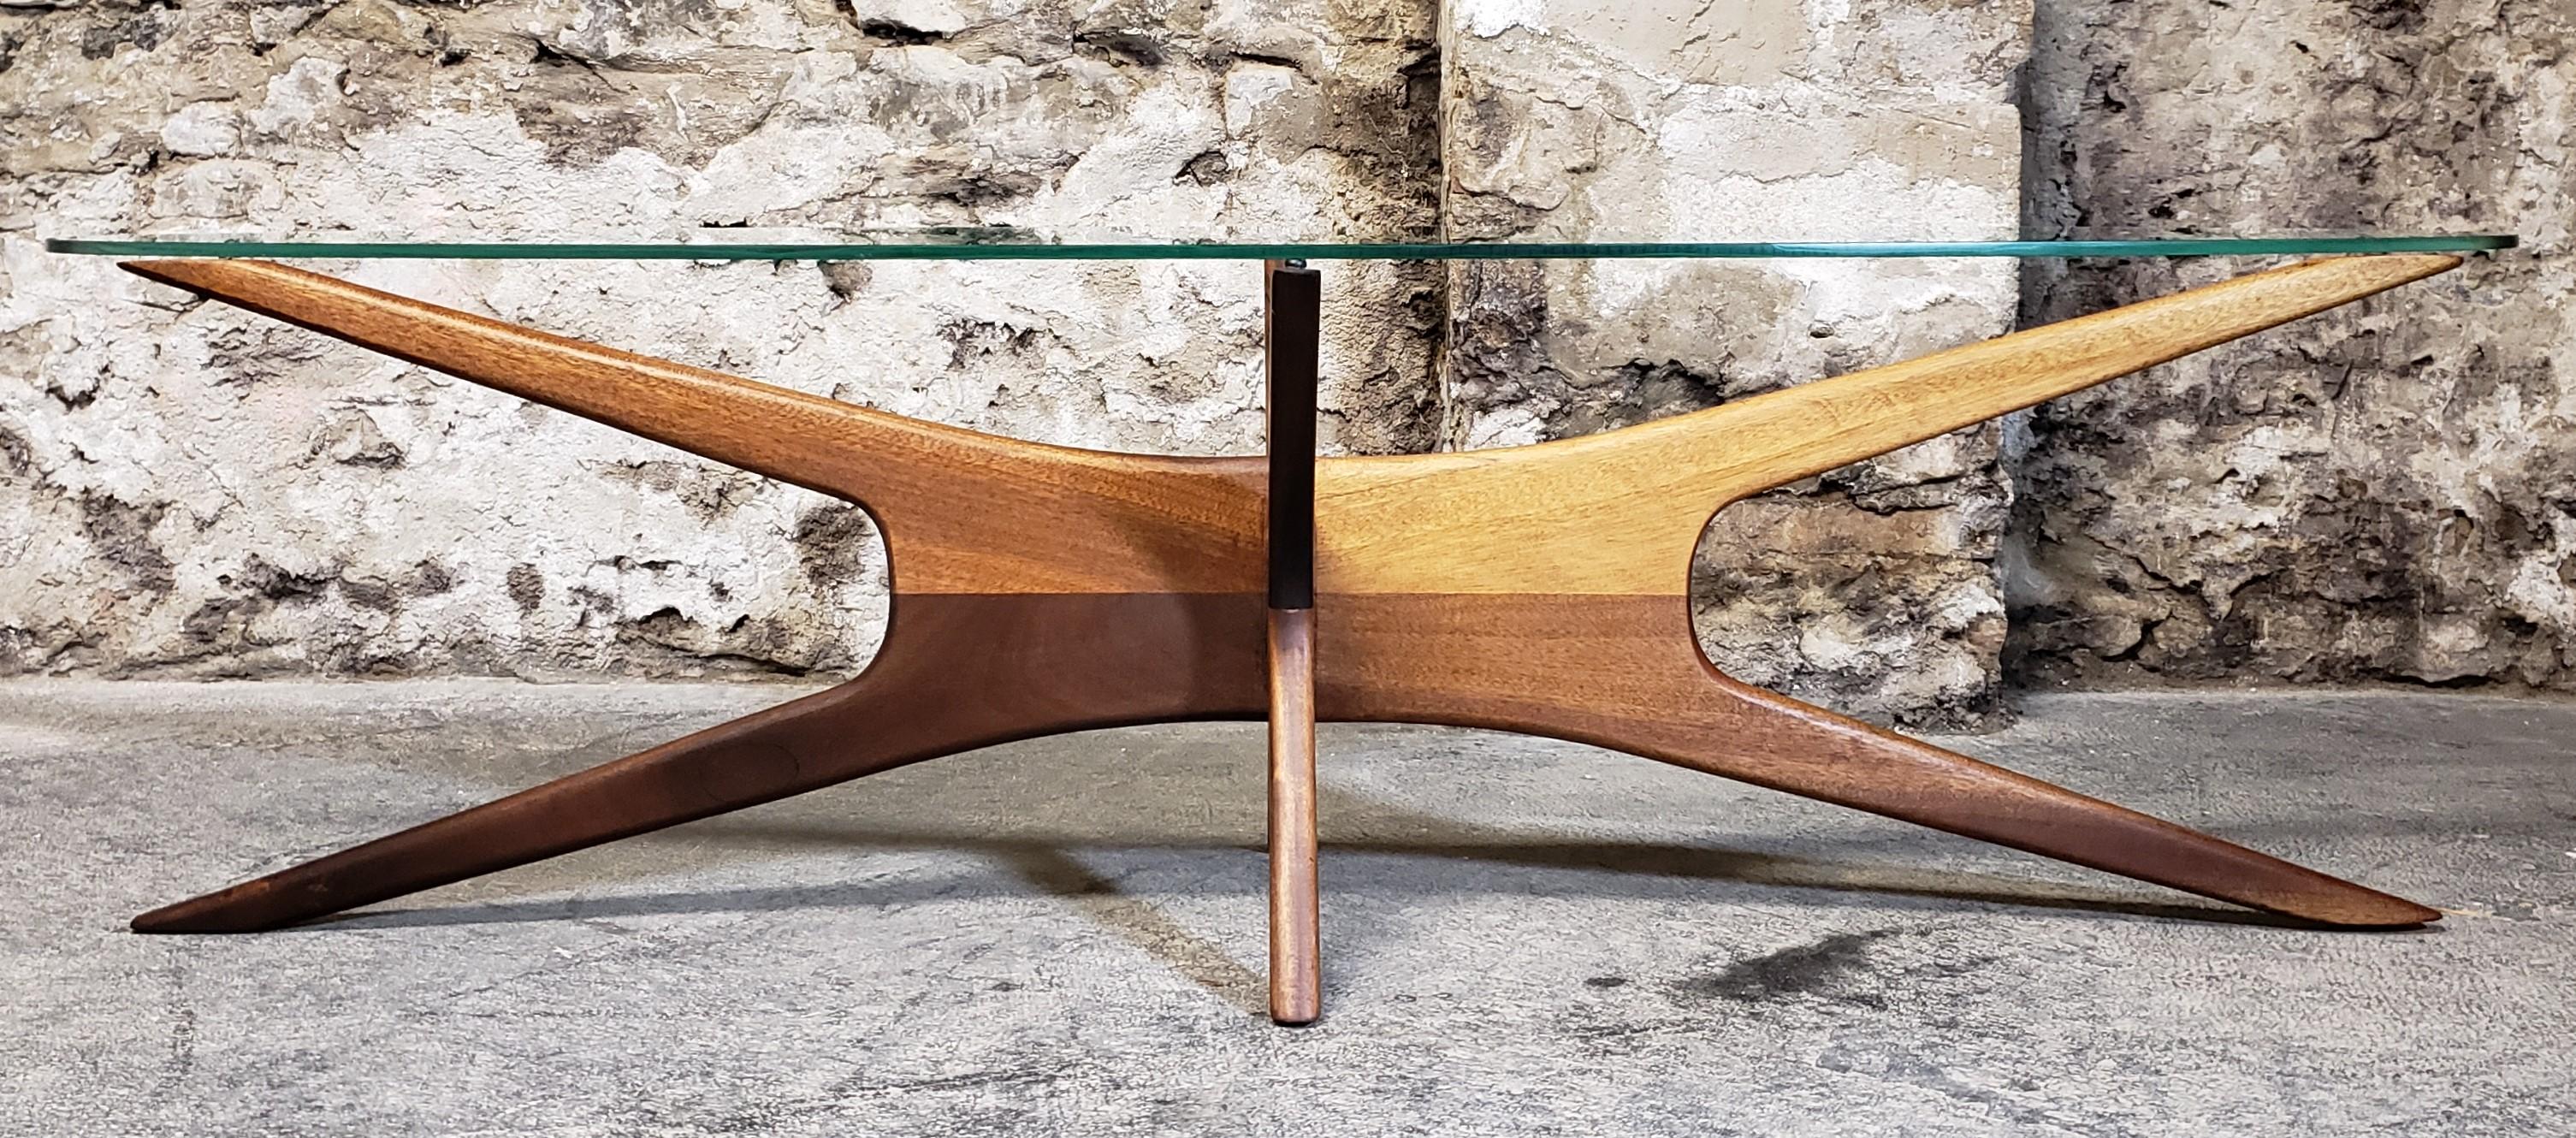 Dating from the 1960s, this iconic “Jacks” mid-century modern coffee table was designed by Adrian Pearsall for Craft Associates. It features a modernist sculpted walnut base with a heavy oval glass top.